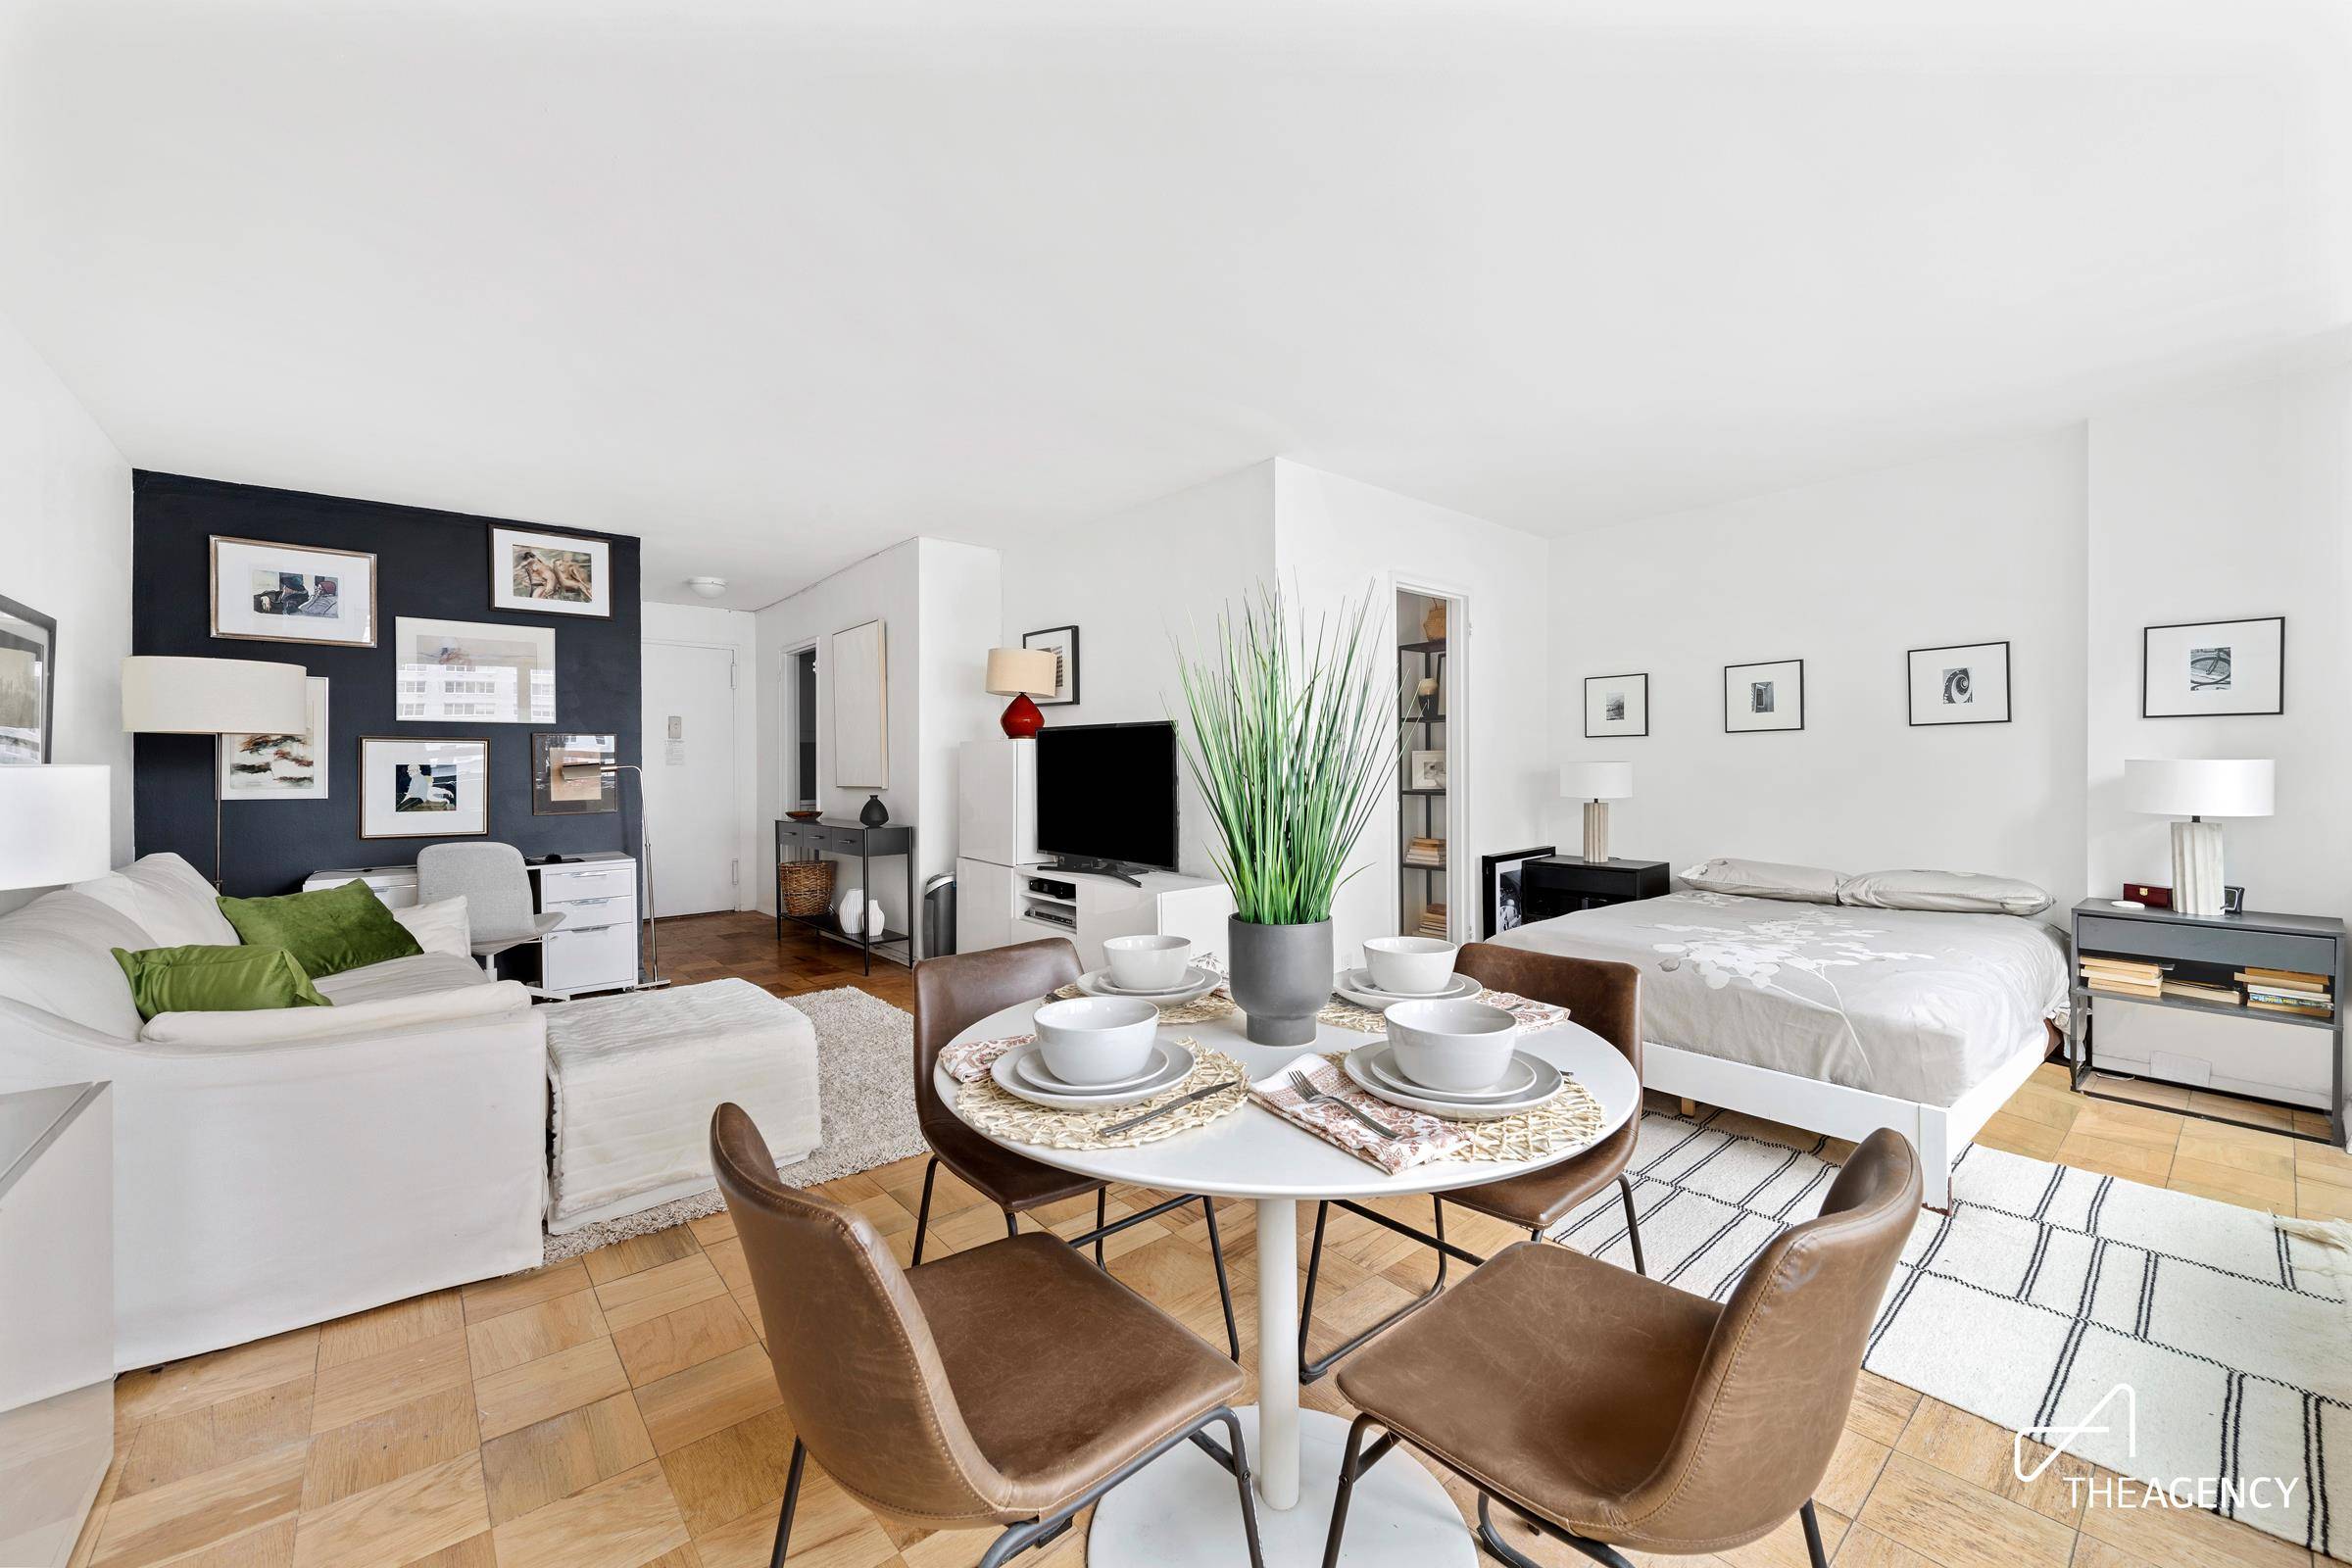 This spacious alcove studio provides the opportunity to take advantage of the most reasonable pricing in the complex to secure the palette on which to create a masterpiece home or ...